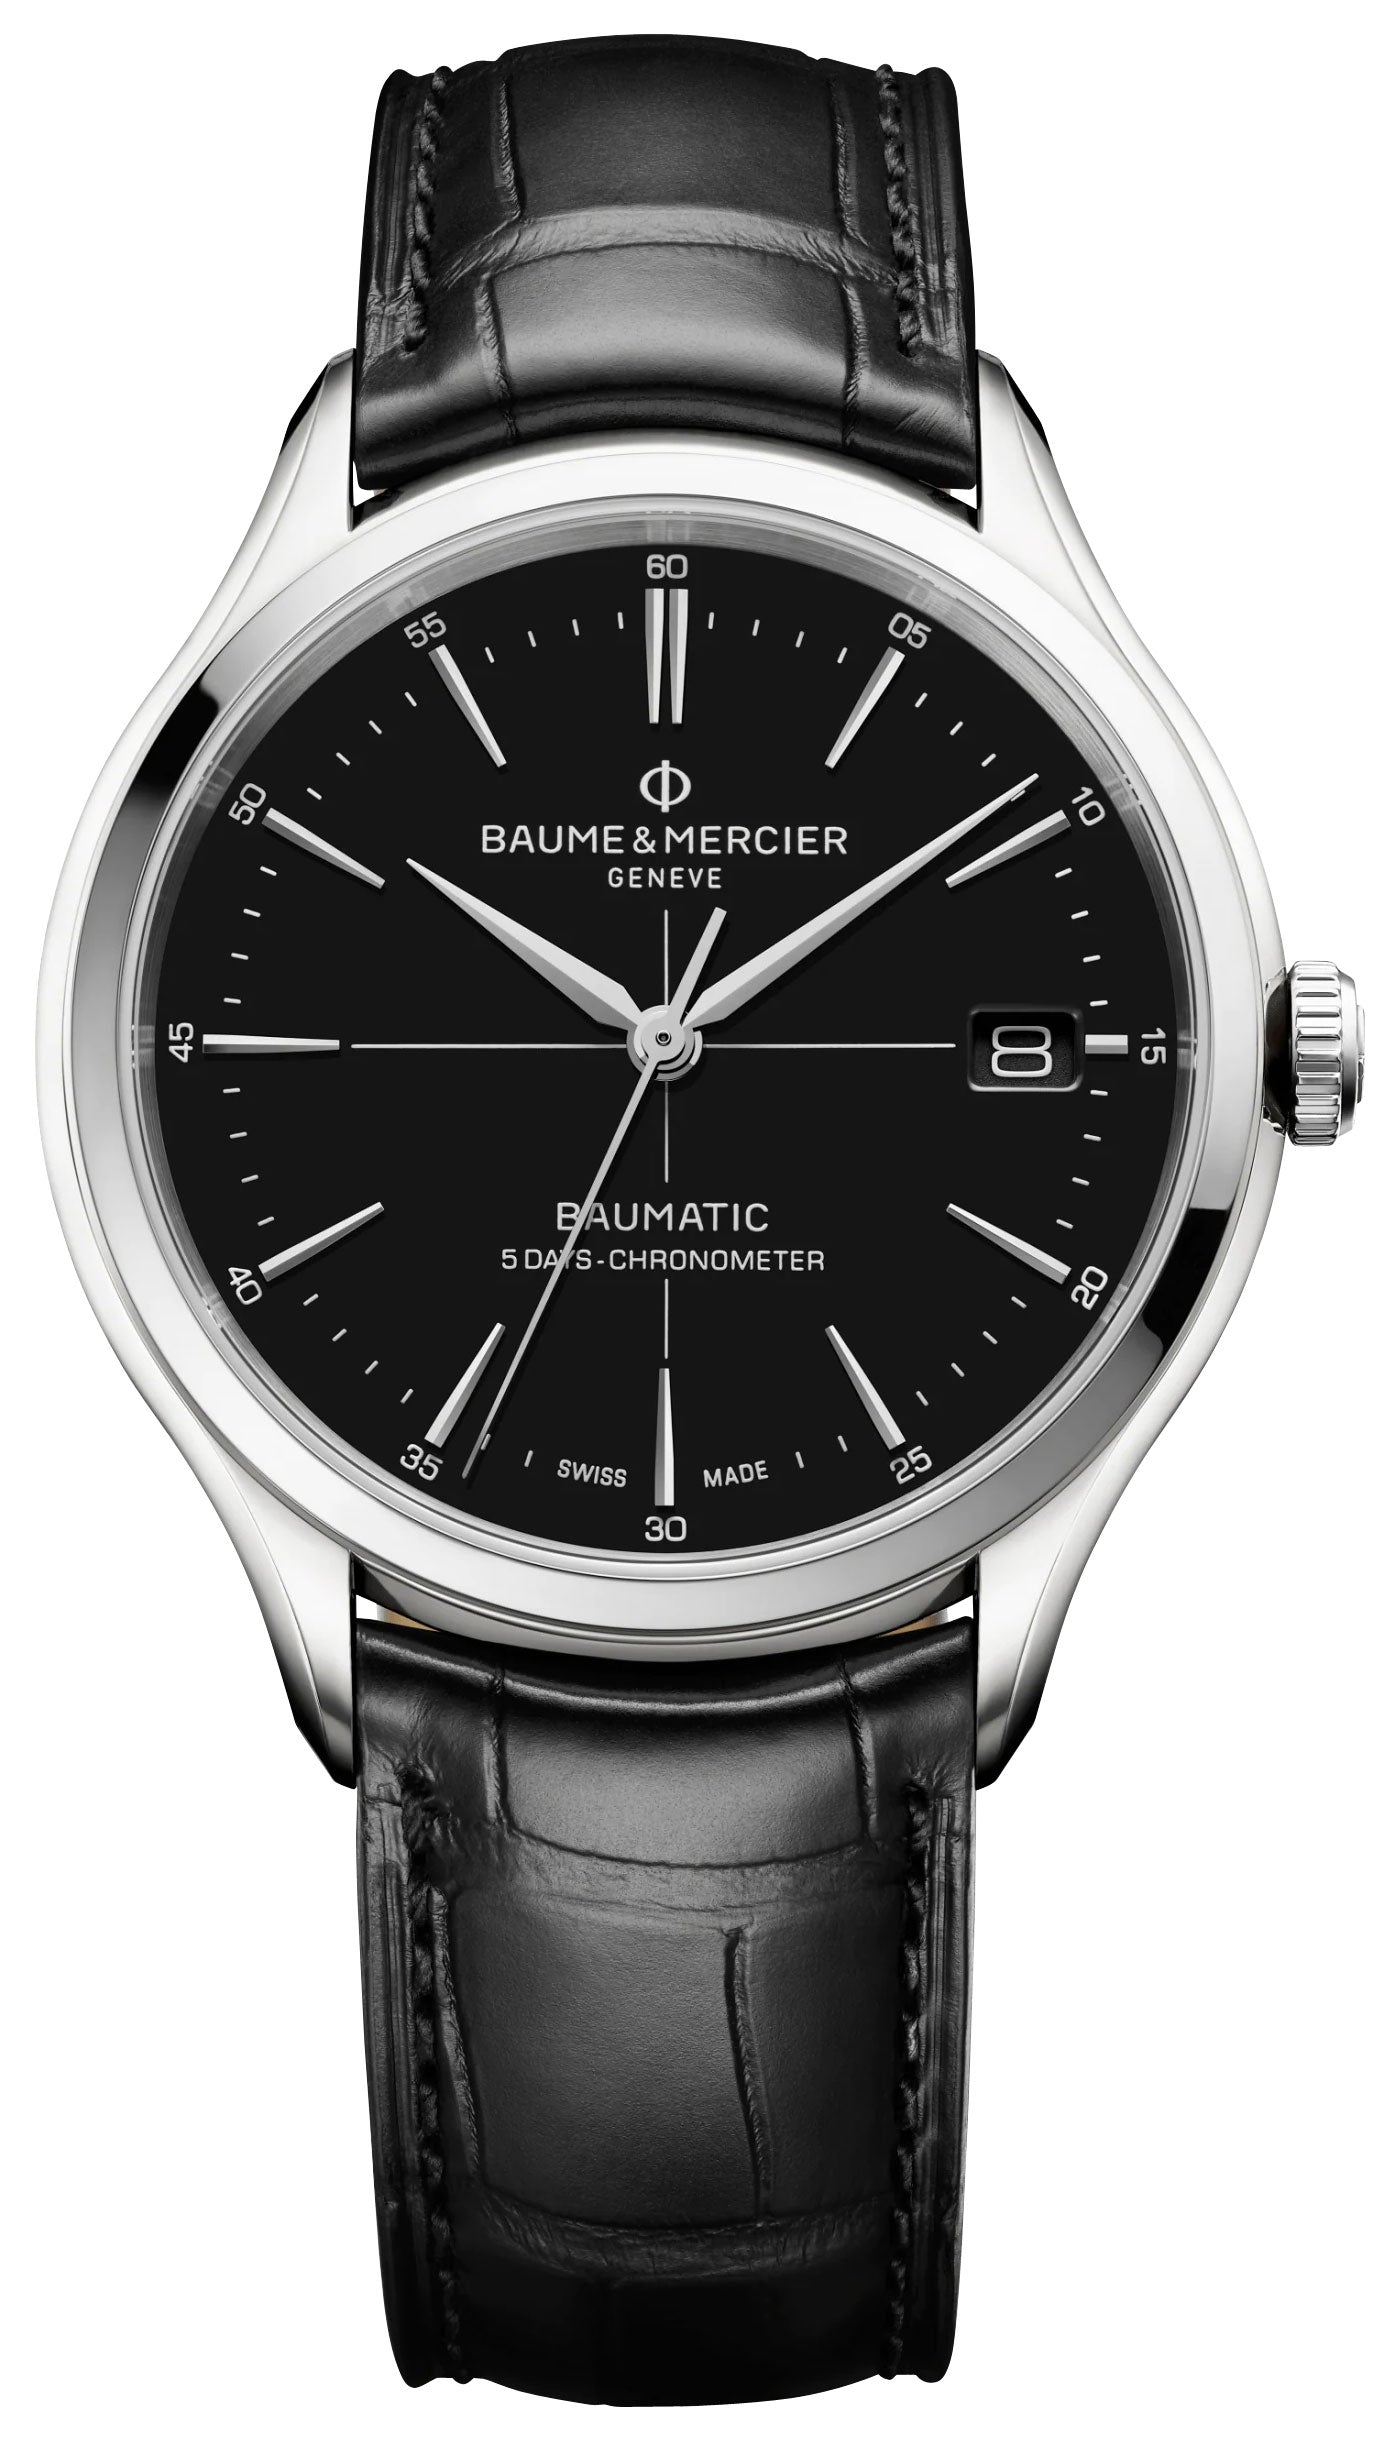 update alt-text with template Watches - Mens-Baume & Mercier-M0A10692-35 - 40 mm, 40 - 45 mm, Baume & Mercier, black, Clifton, COSC, date, leather, mens, menswatches, new arrivals, round, rpSKU_M0A10398, rpSKU_M0A10467, rpSKU_M0A10468, rpSKU_M0A10505, rpSKU_M0A10592, stainless steel case, swiss automatic, watches-Watches & Beyond